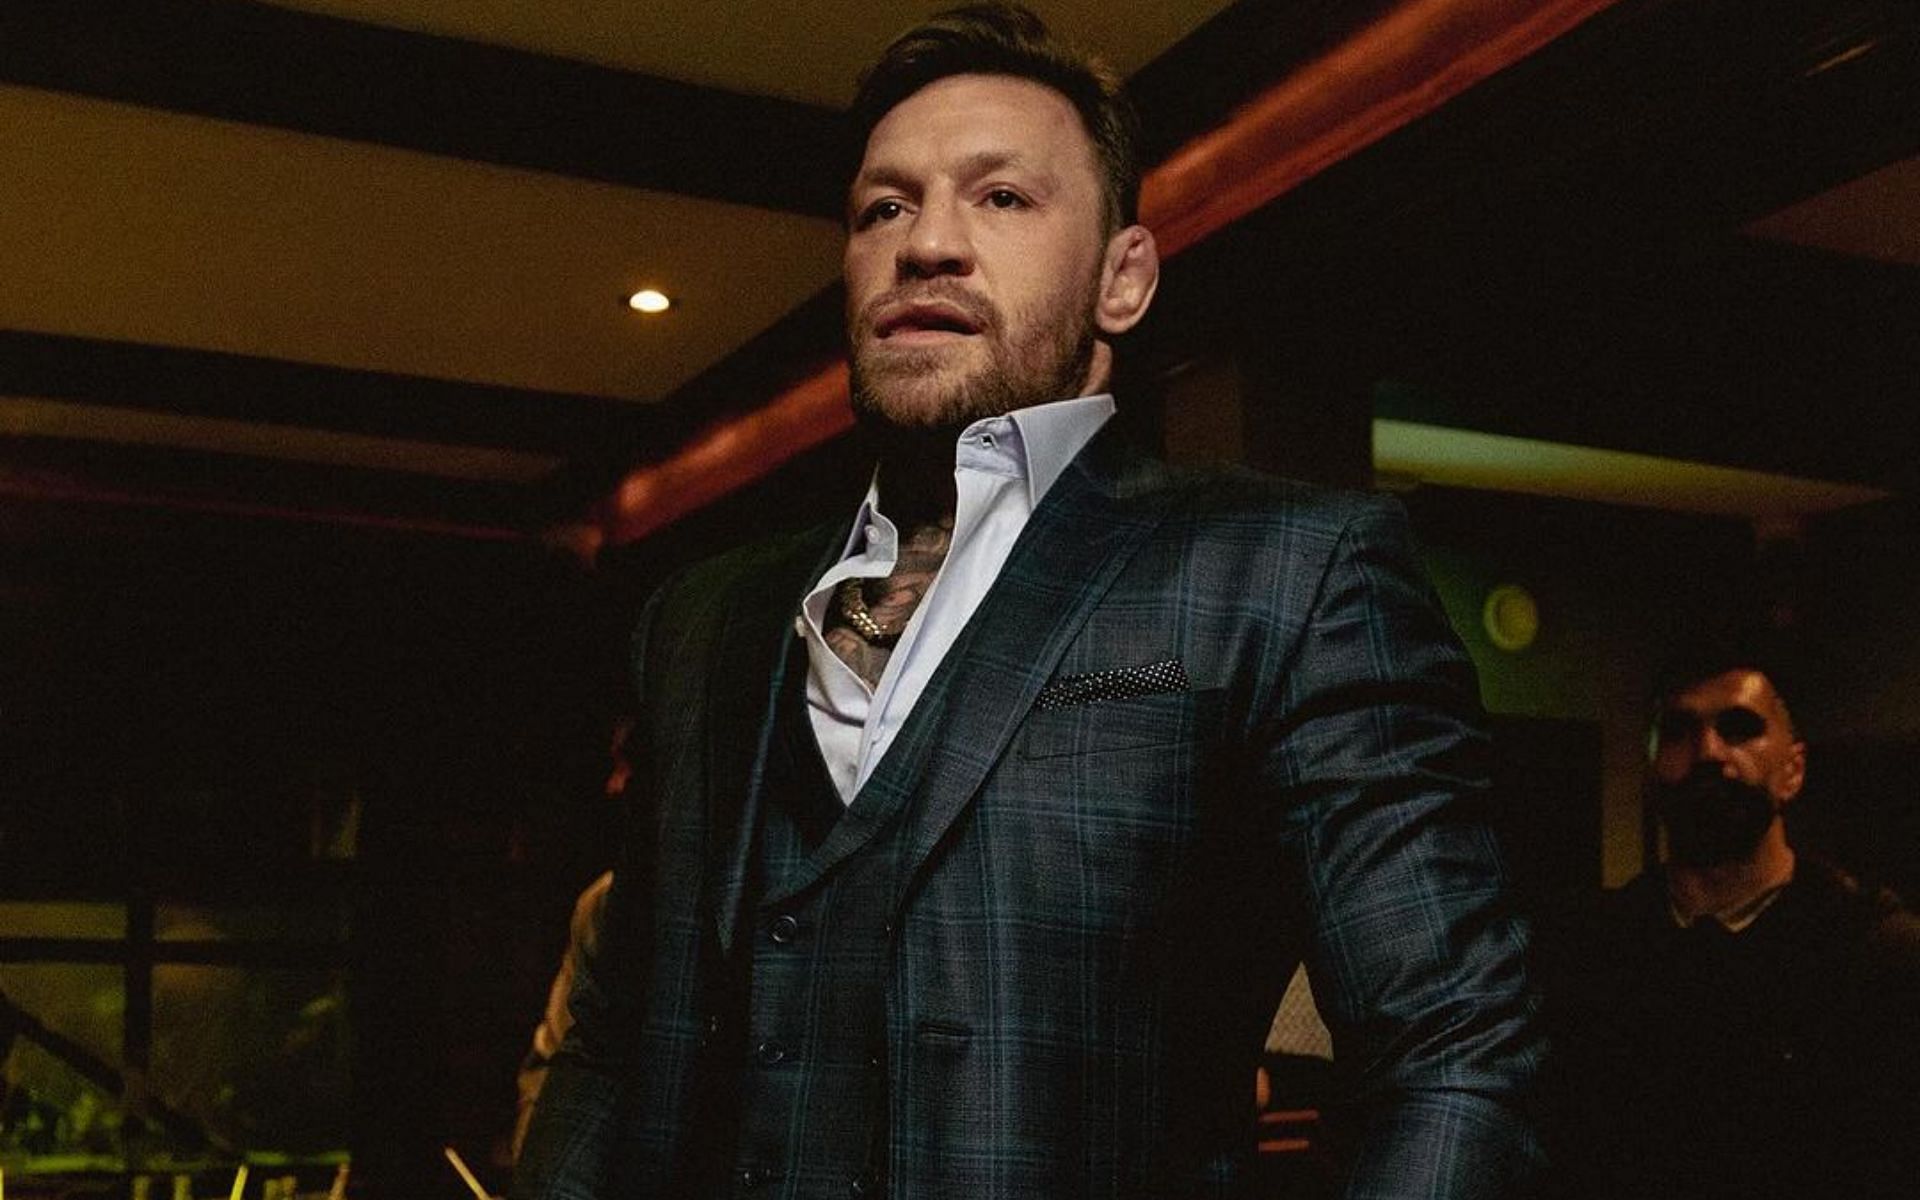 Former UFC middleweight champ shares his position on Conor McGregor fight talks